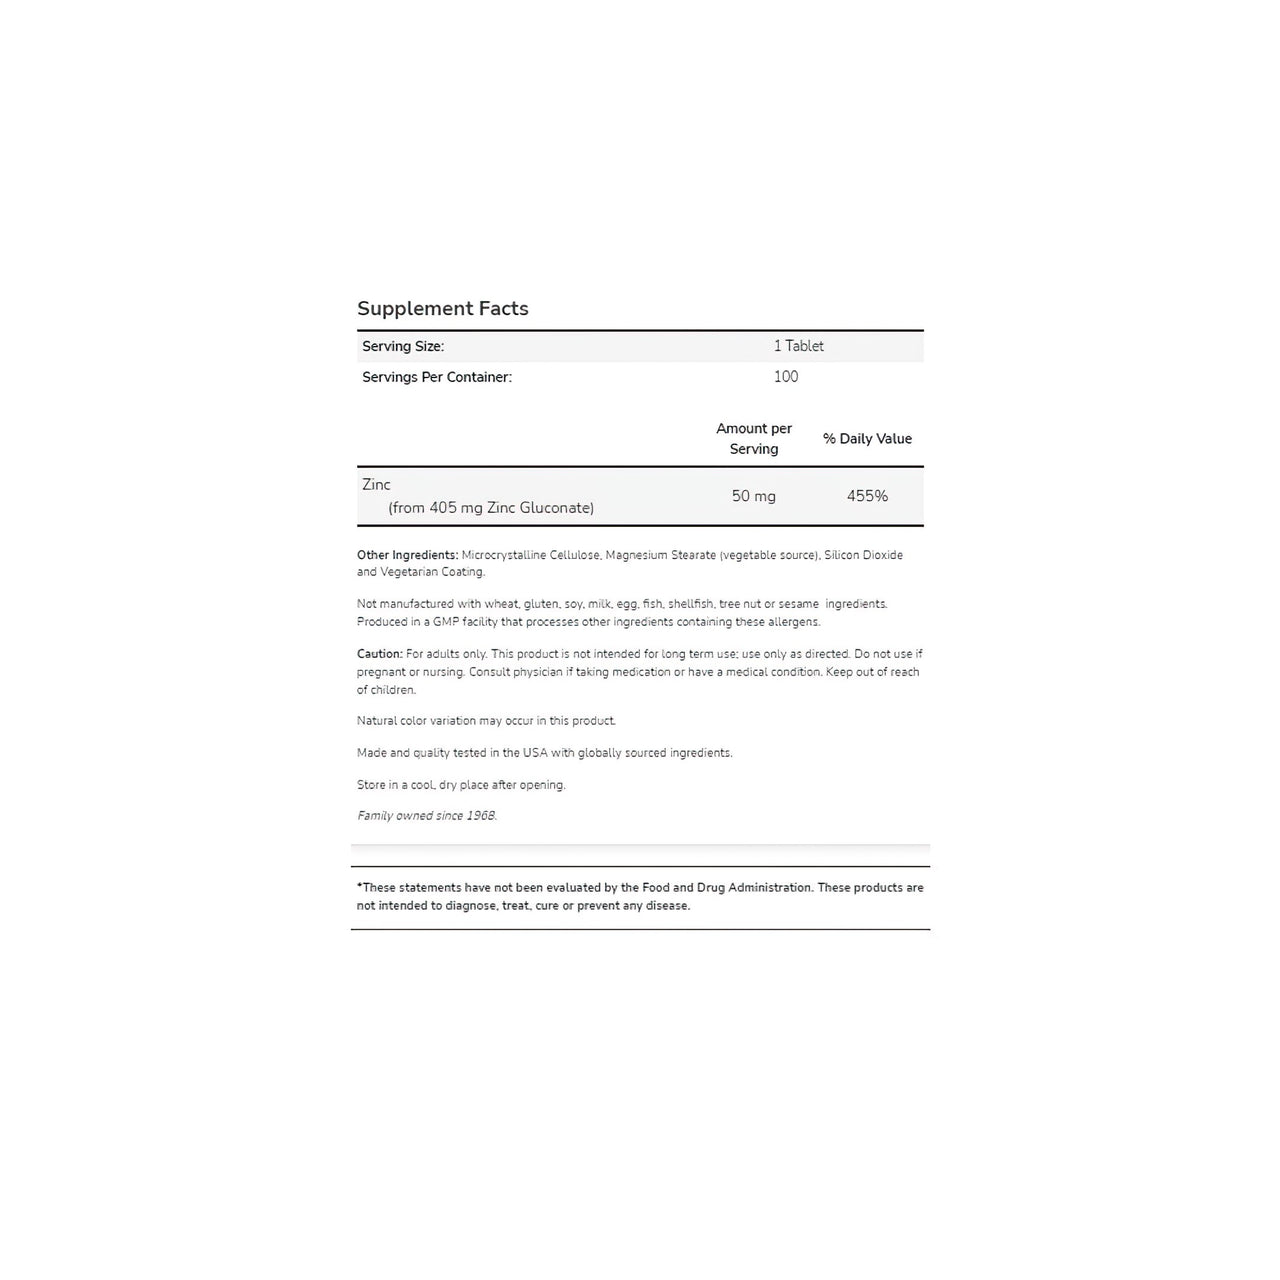 A sample of an application form for a job focusing on immune health featuring Now Foods' Zinc Gluconate 50 mg 100 tablets.